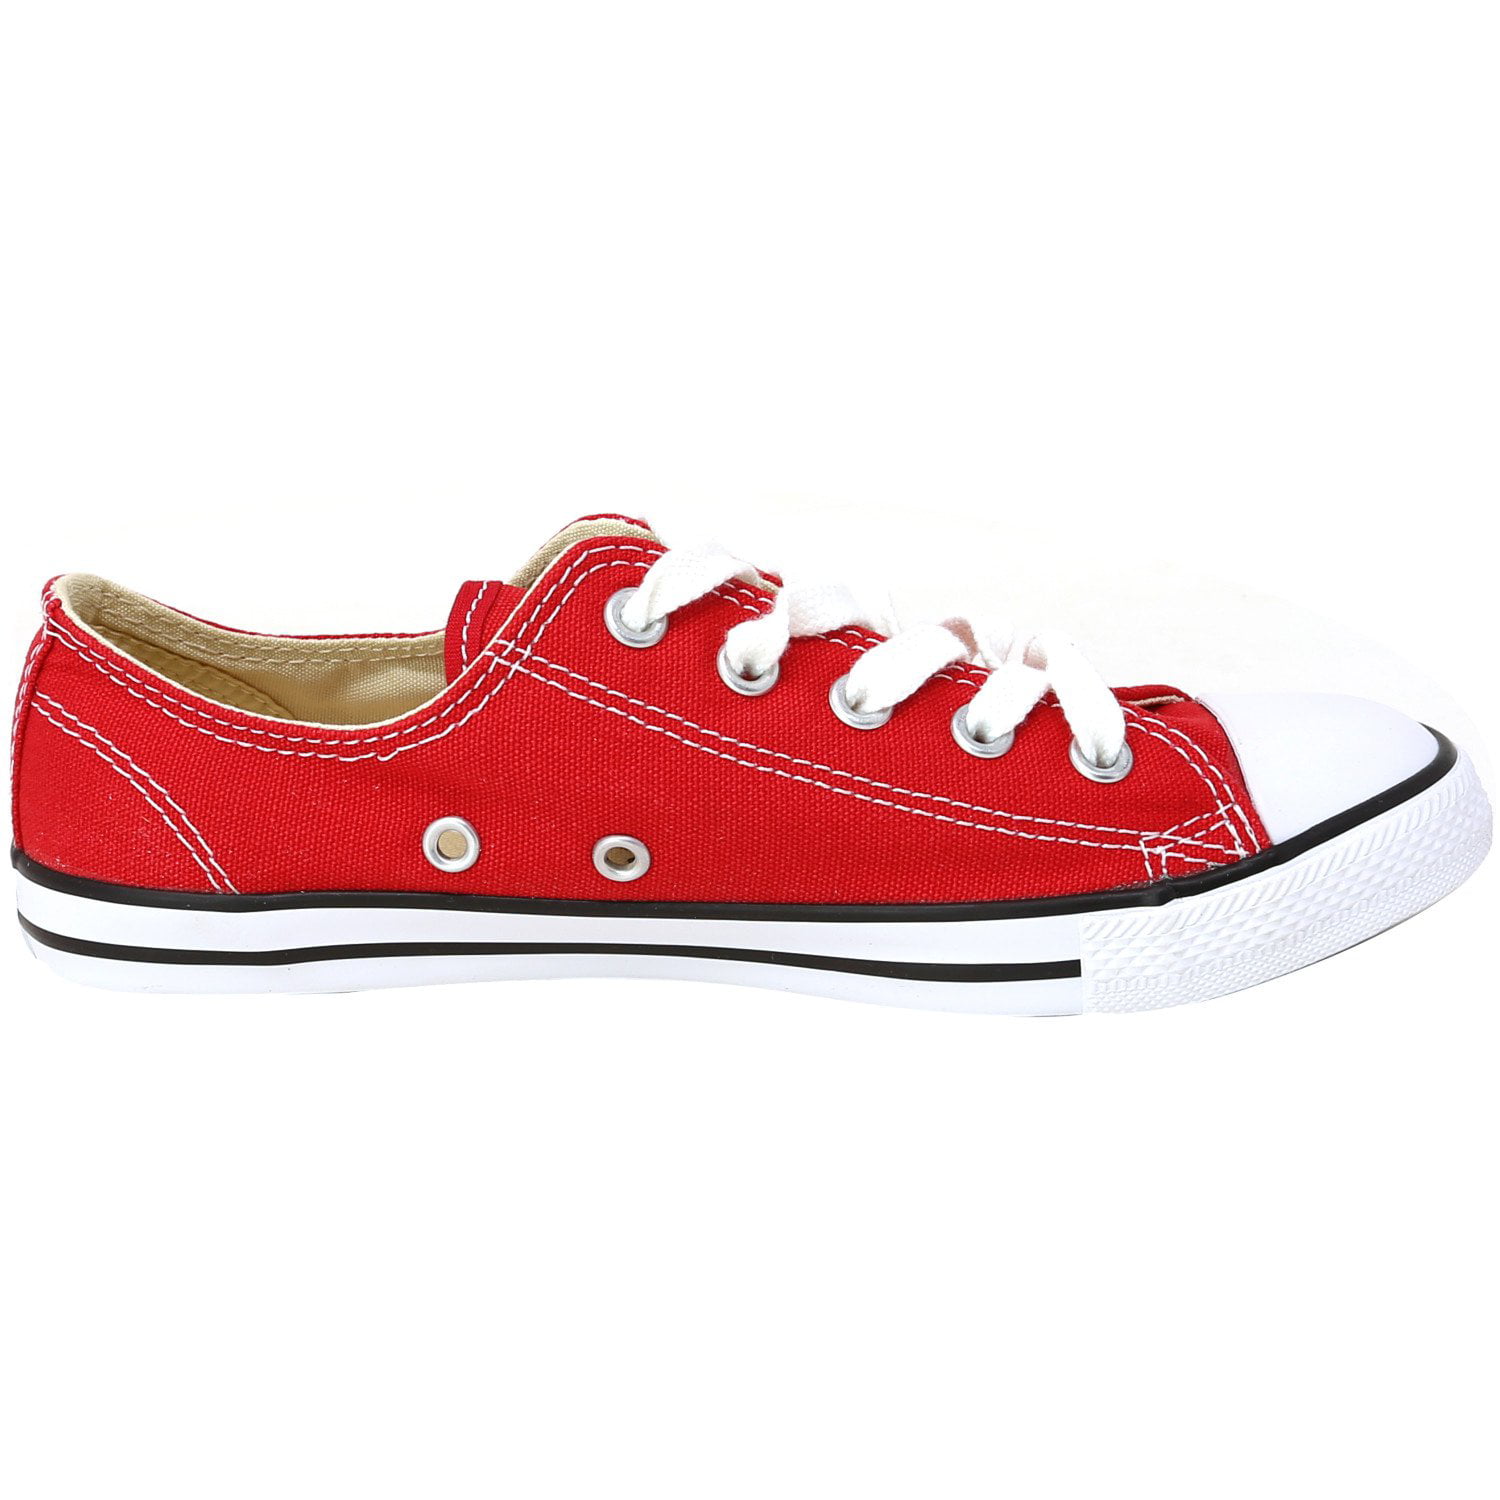 converse dainty red